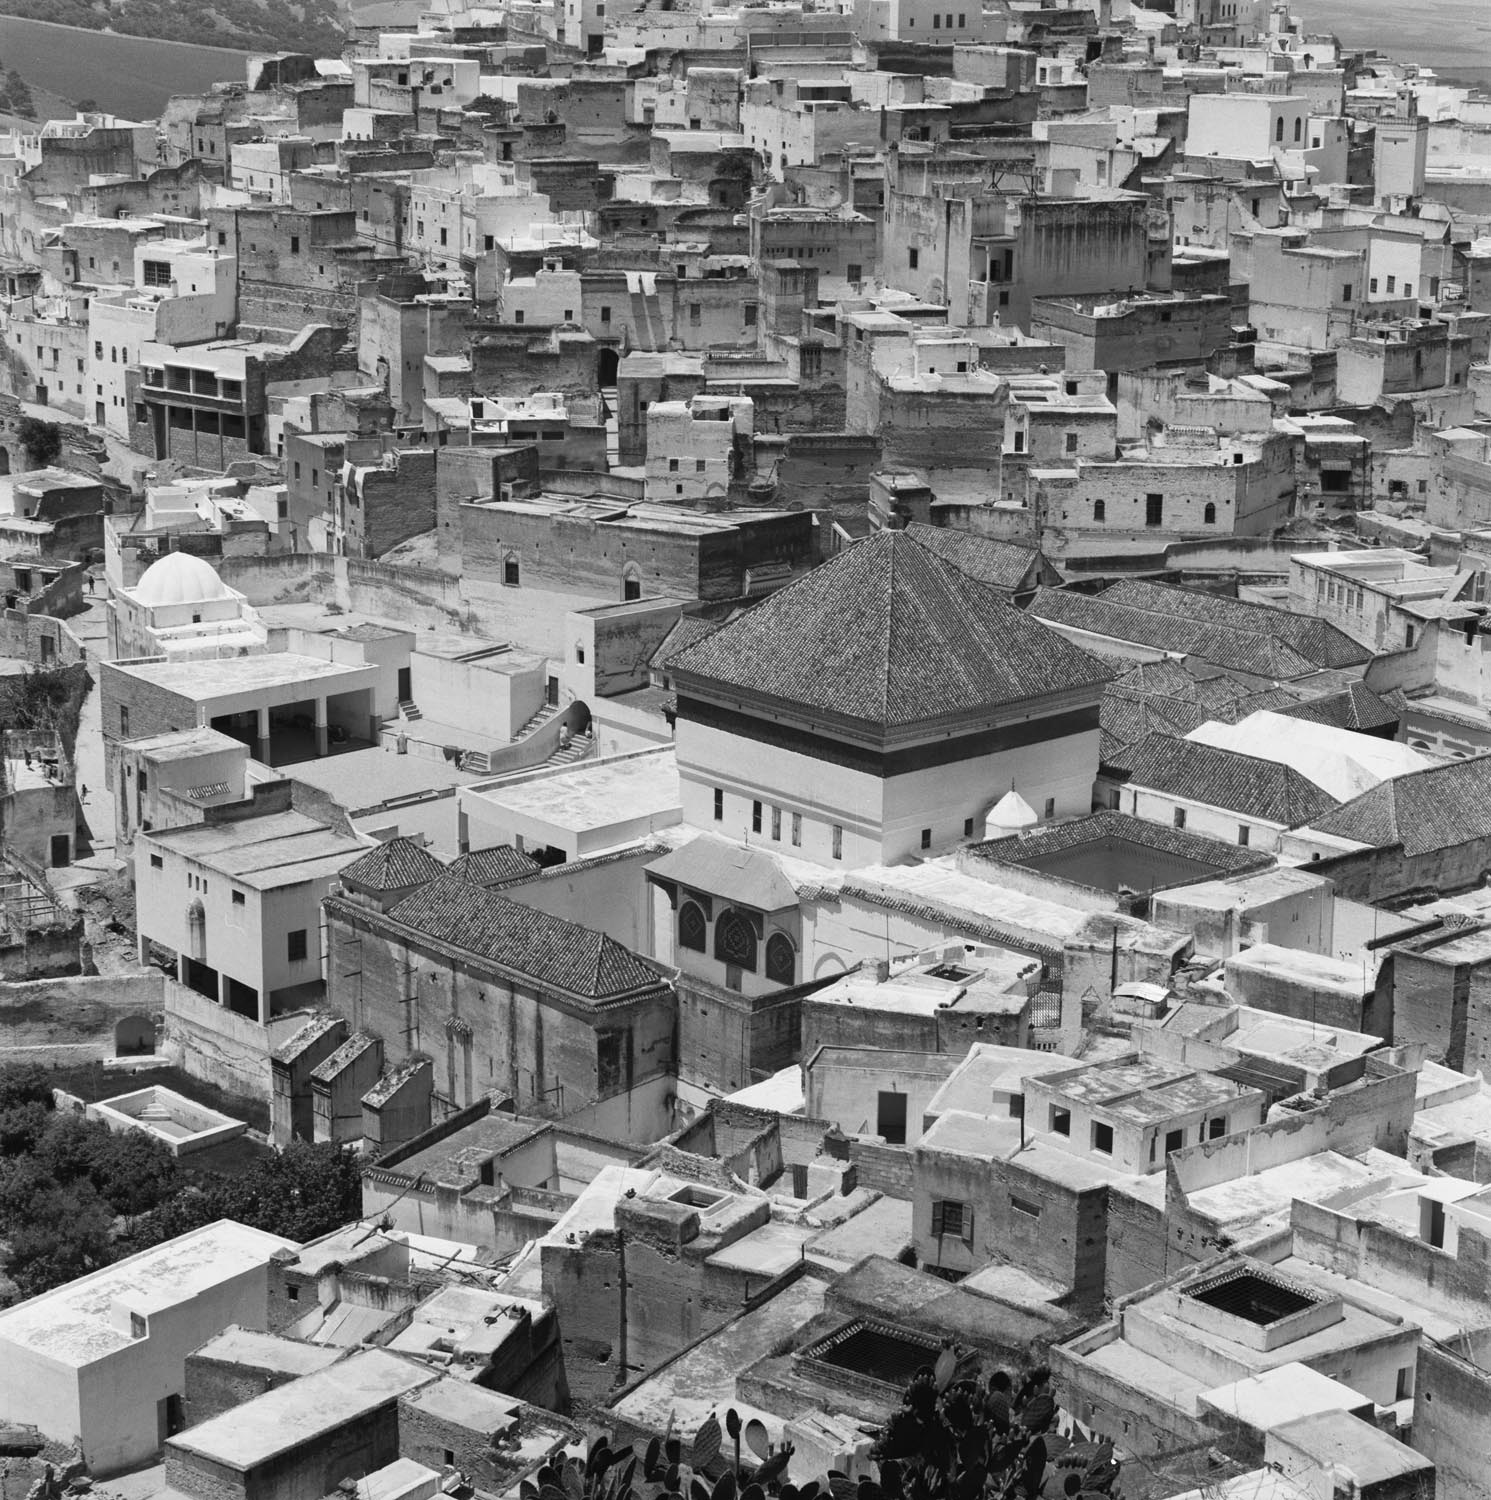 Bird's eye view of the Shrine of Moulay Idris